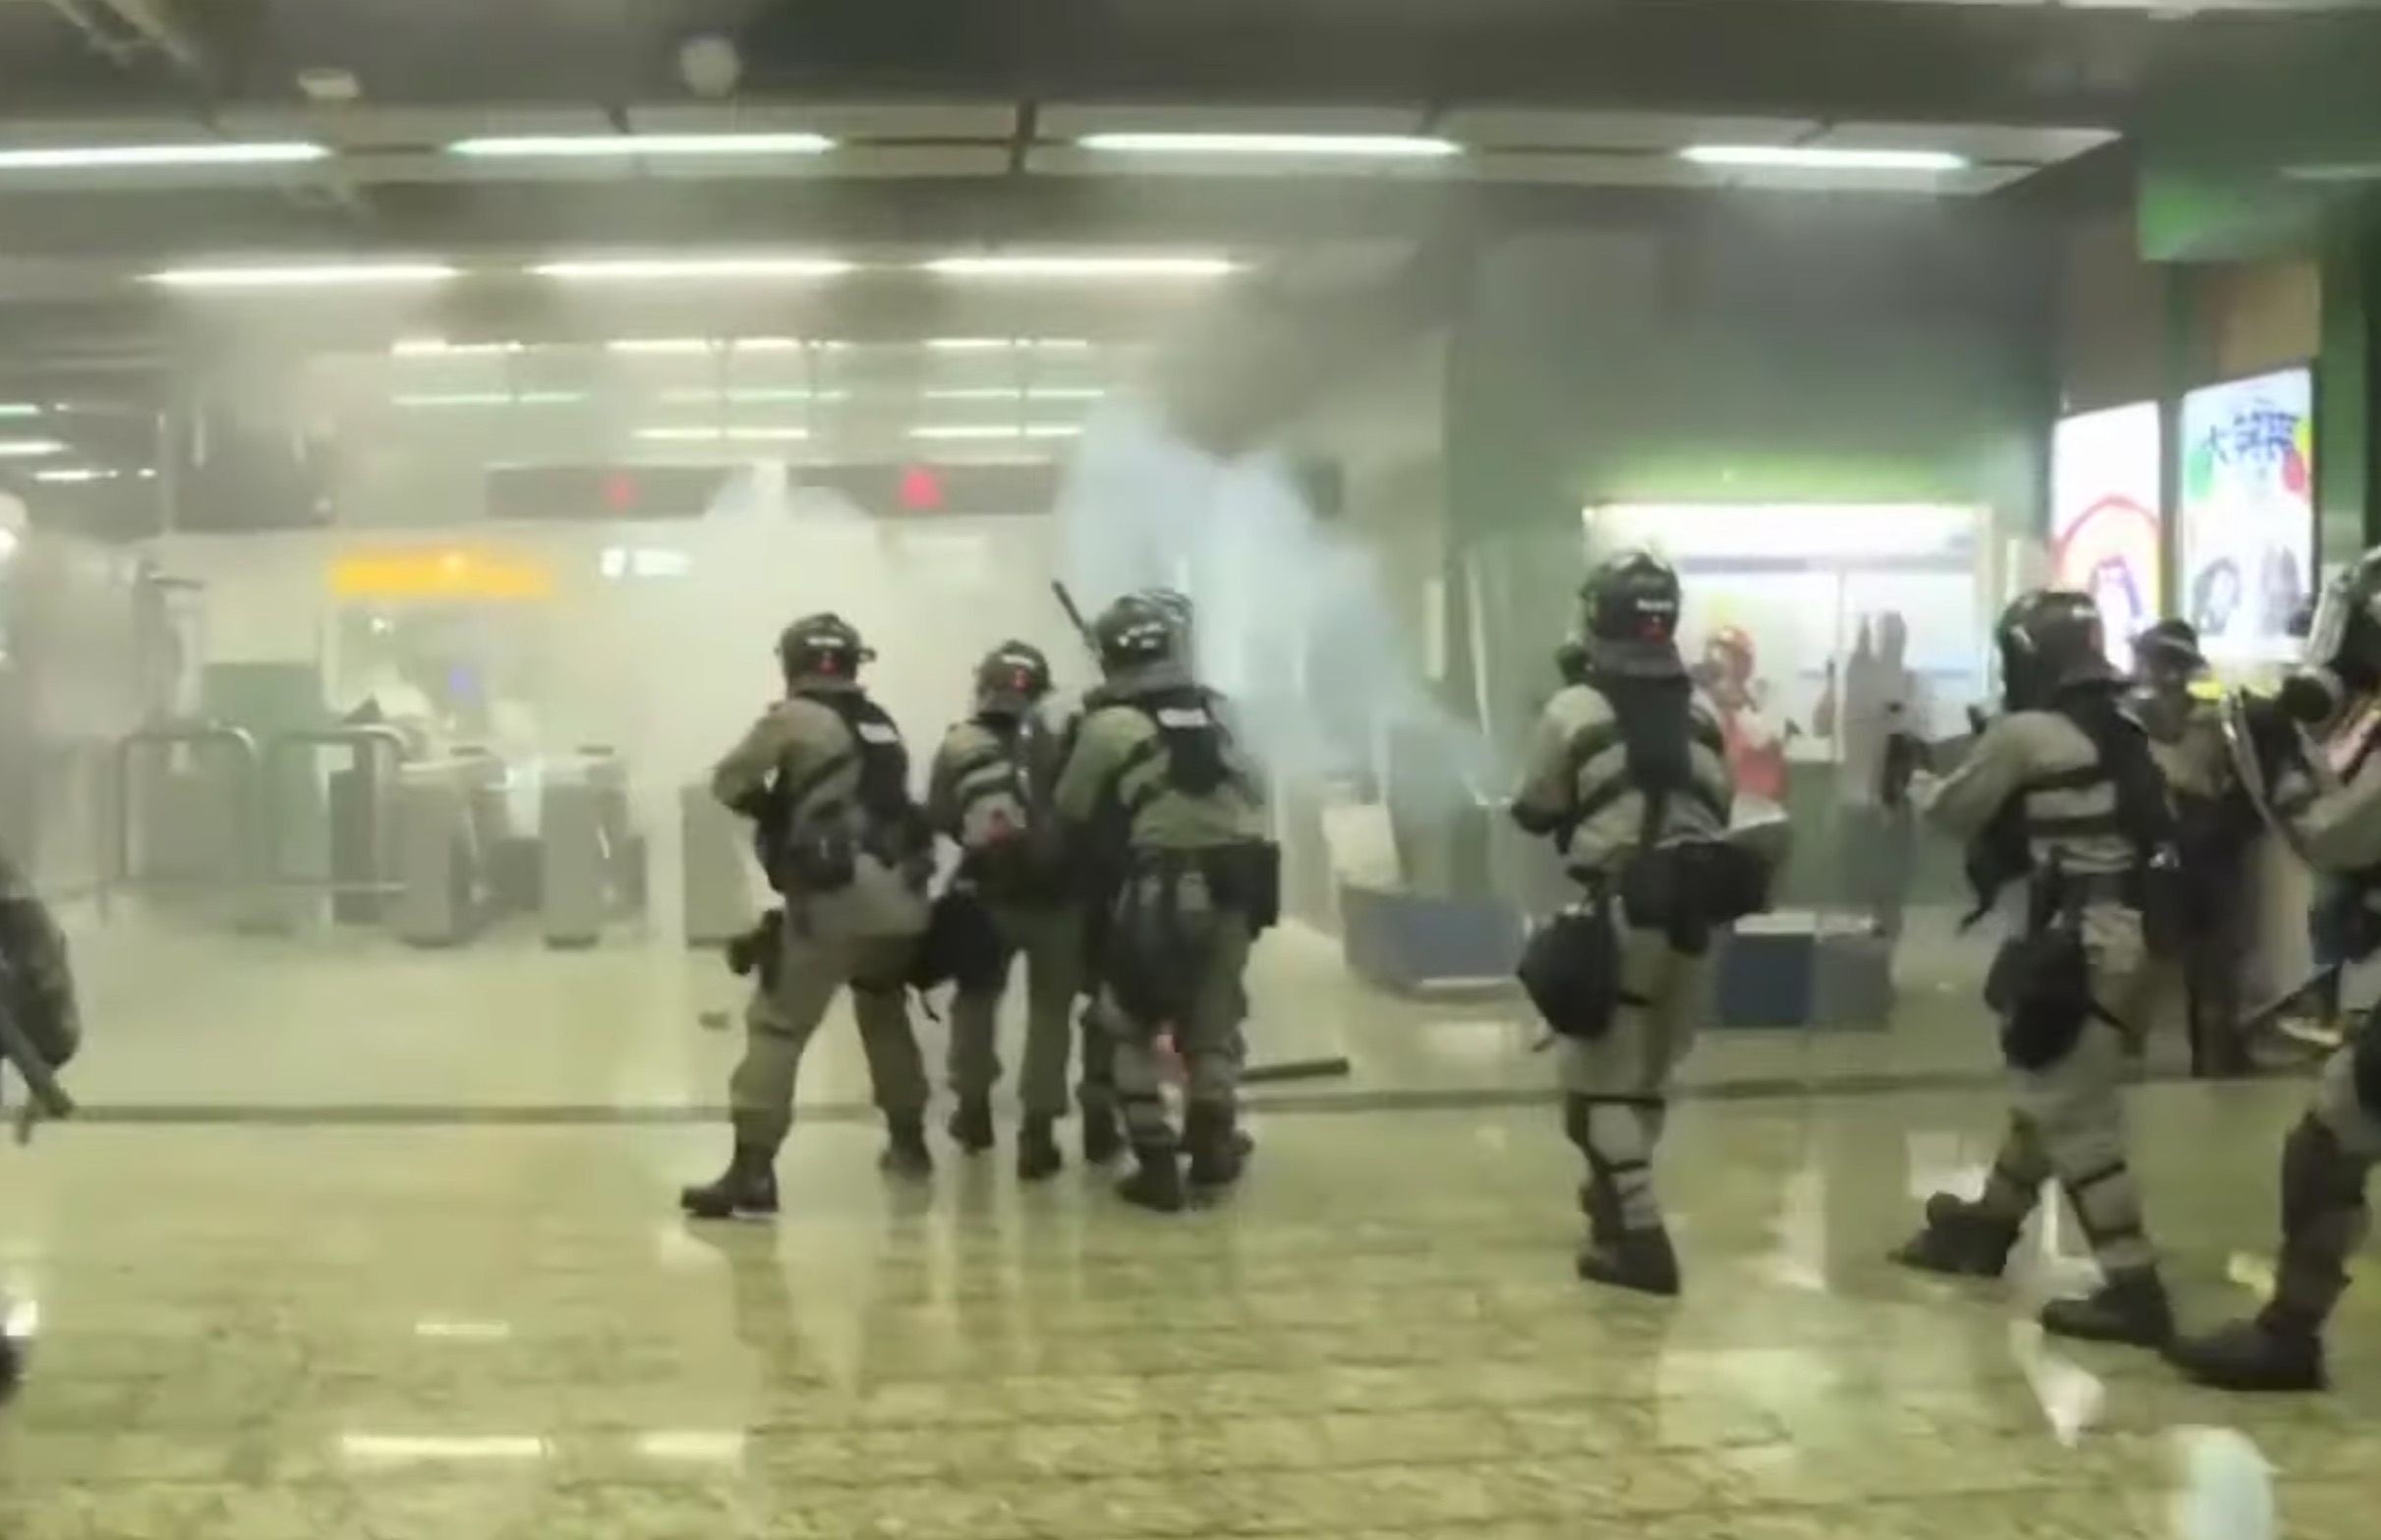 Riot cops fire tear gas into the paid concourse area of Kwai Fong MTR station on the night of August 11. Screengrab via YouTube.